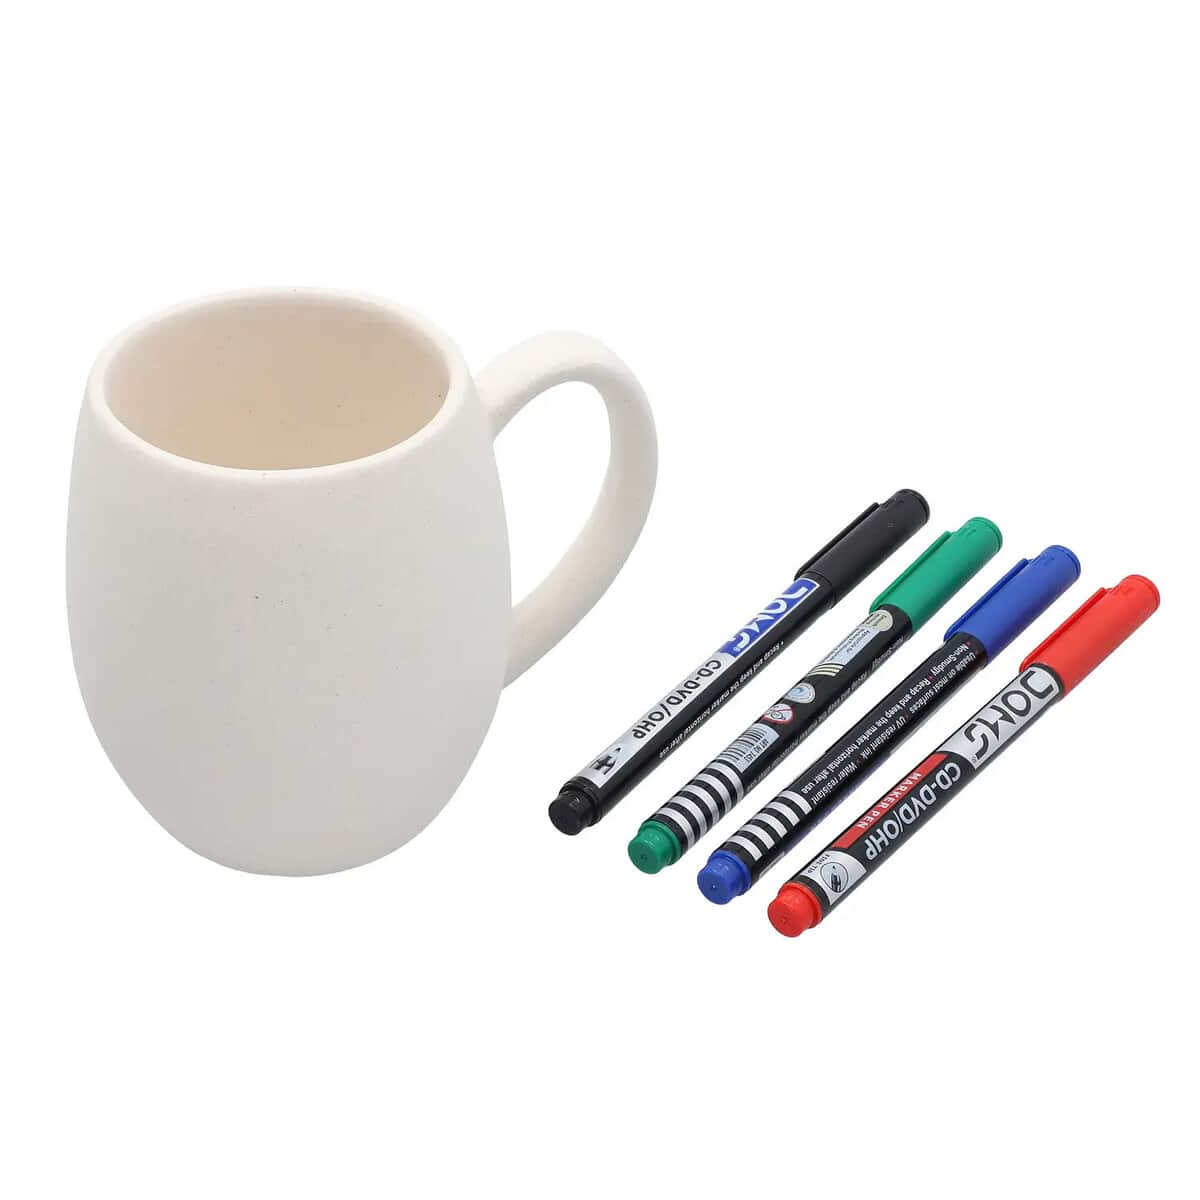 White Ceramic Cup with Handle and 4 Colored Waterproof Markers (13.52 Oz.) image number 0